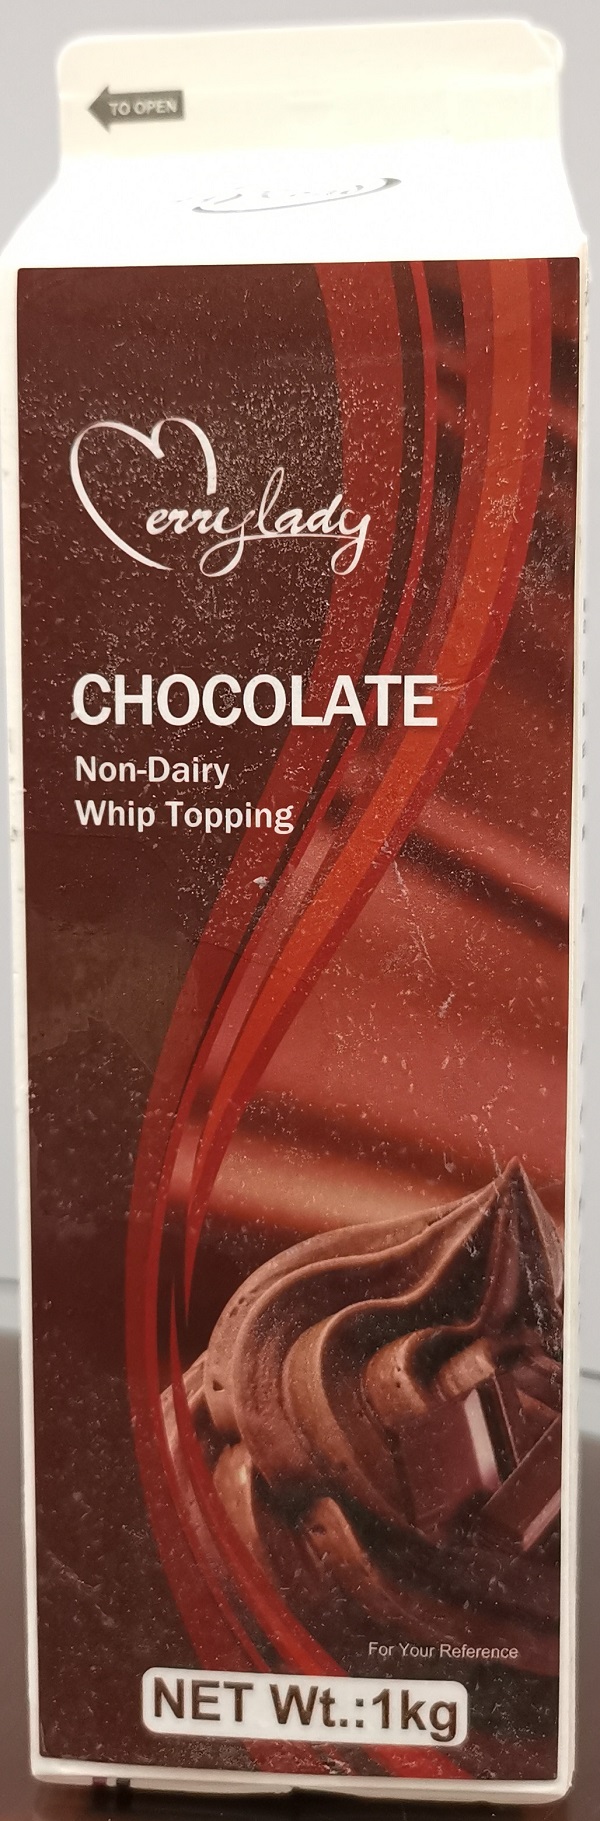 Merrylady – Chocolate Non-Dairy Whip Topping – 1 kg (front)